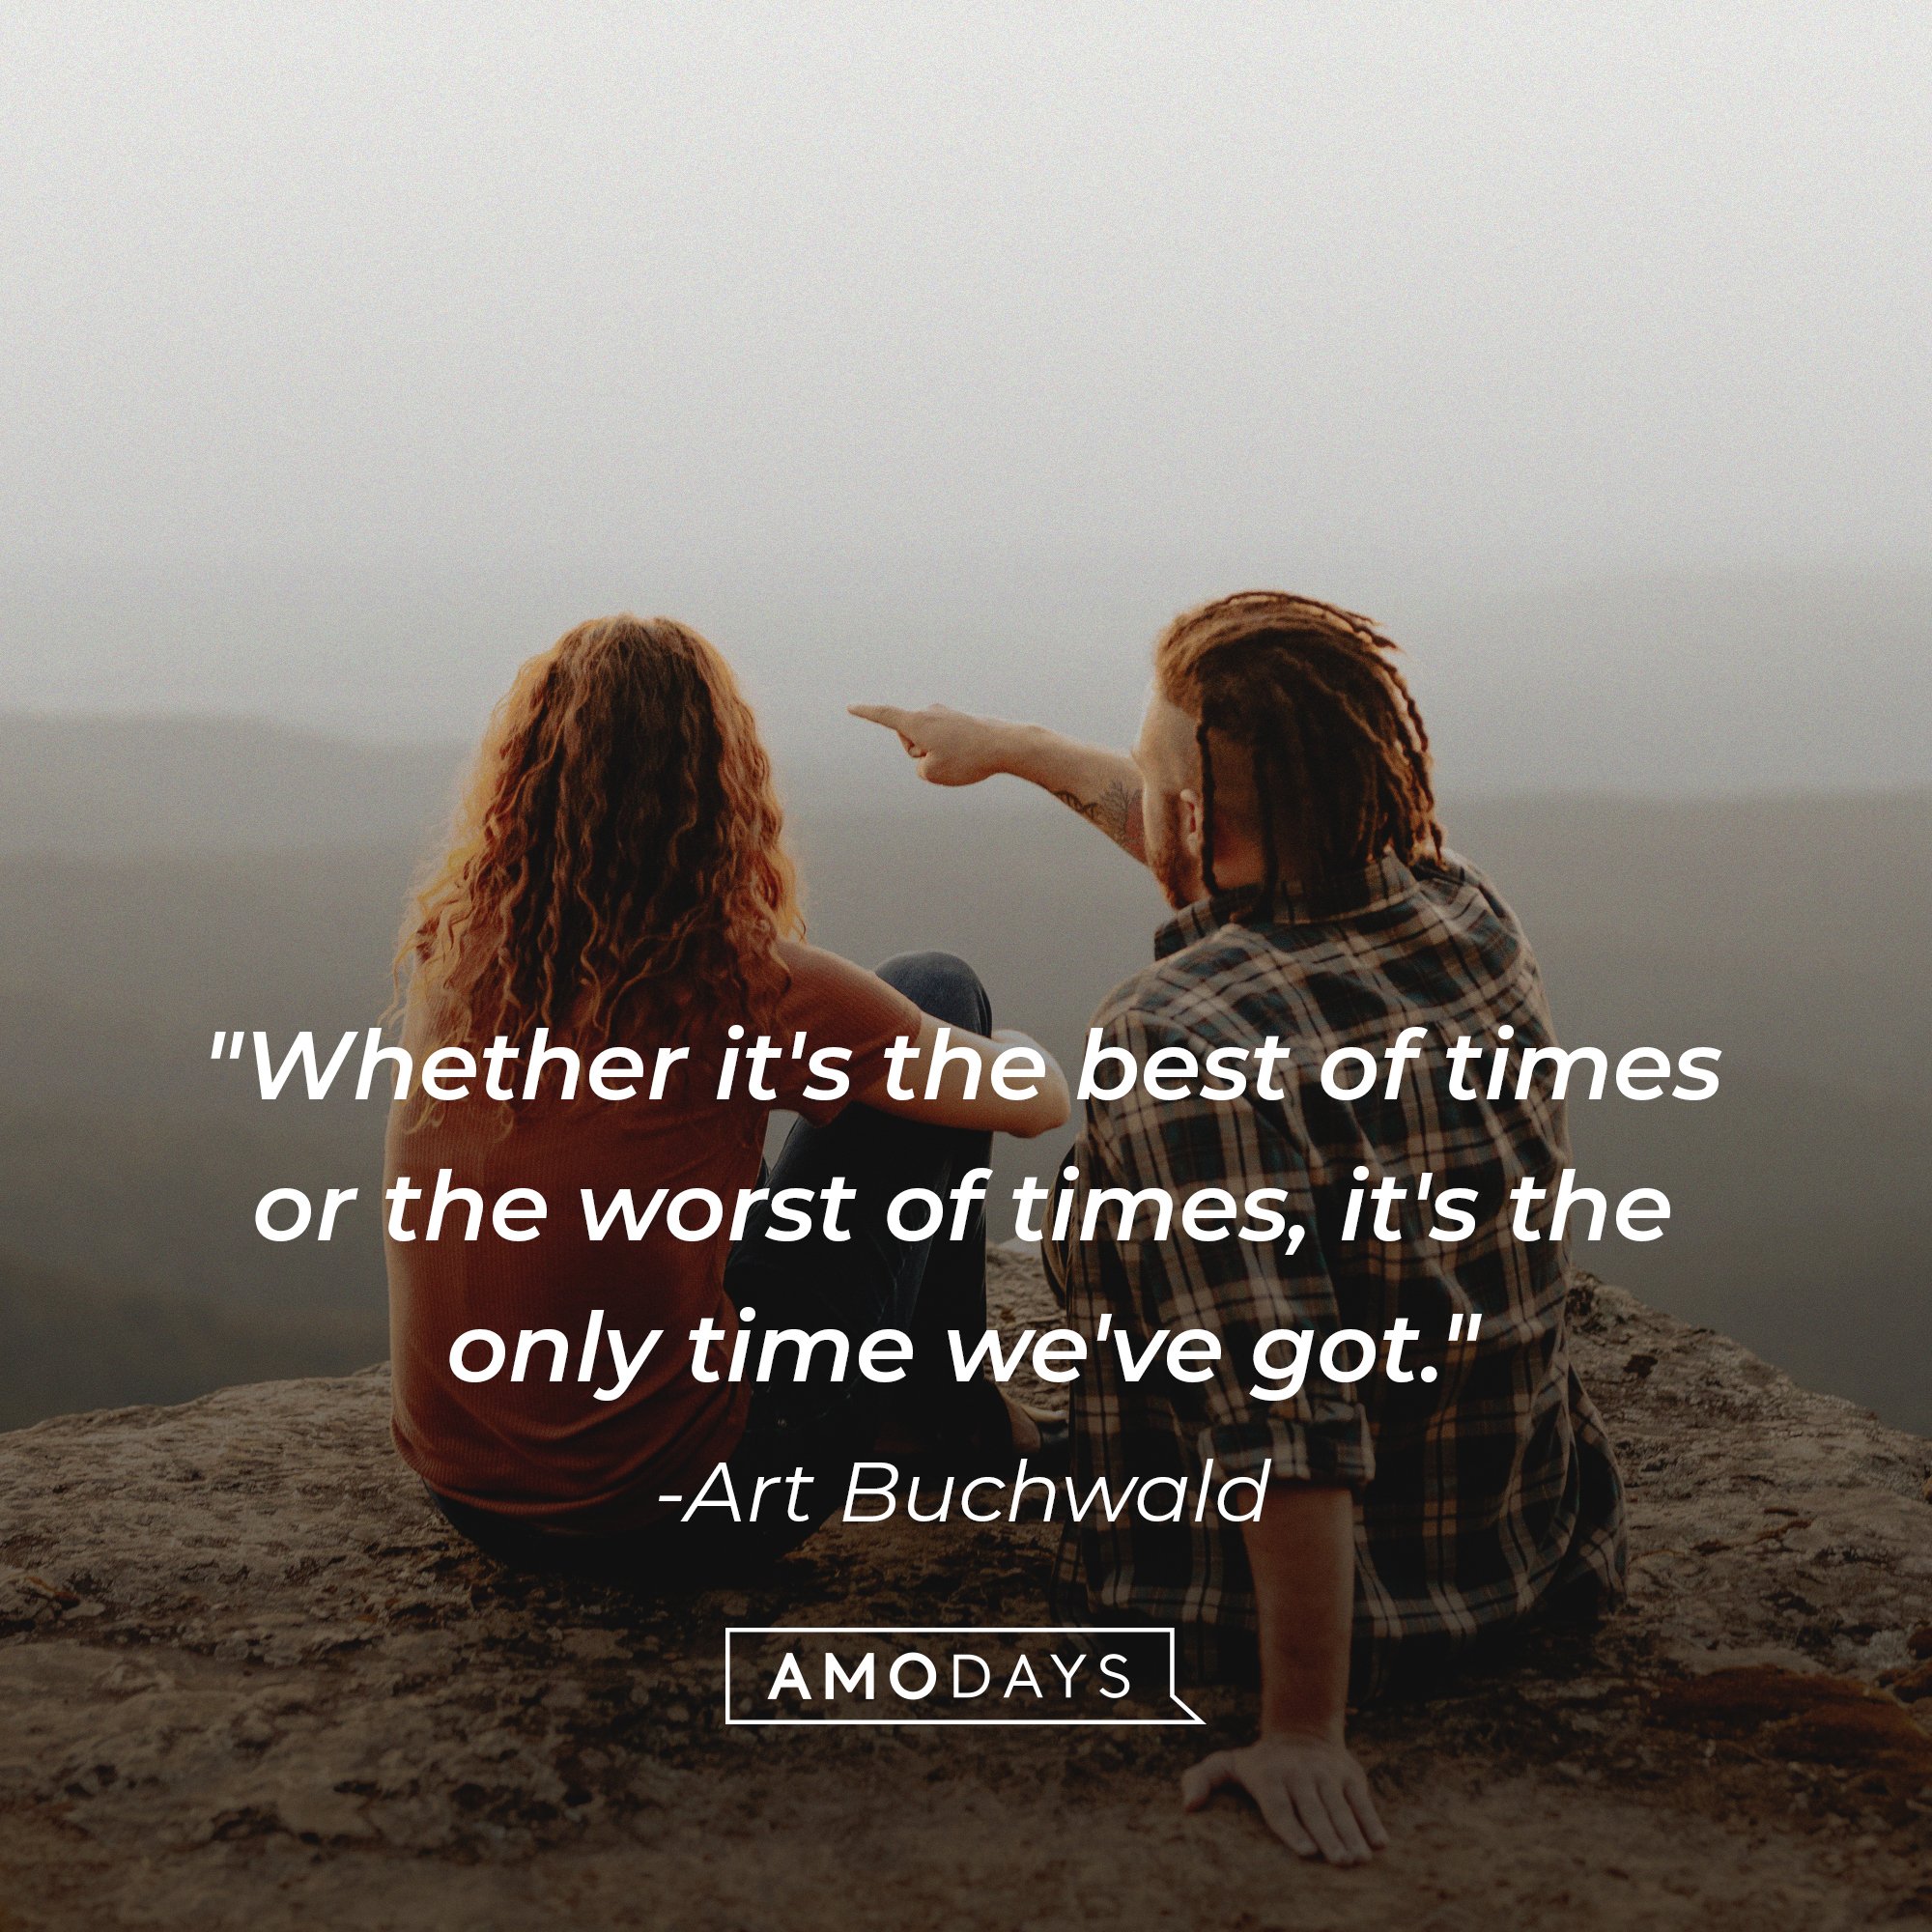   Art Buchwald’s quote: "Whether it's the best of times or the worst of times, it's the only time we've got." | Image: AmoDays